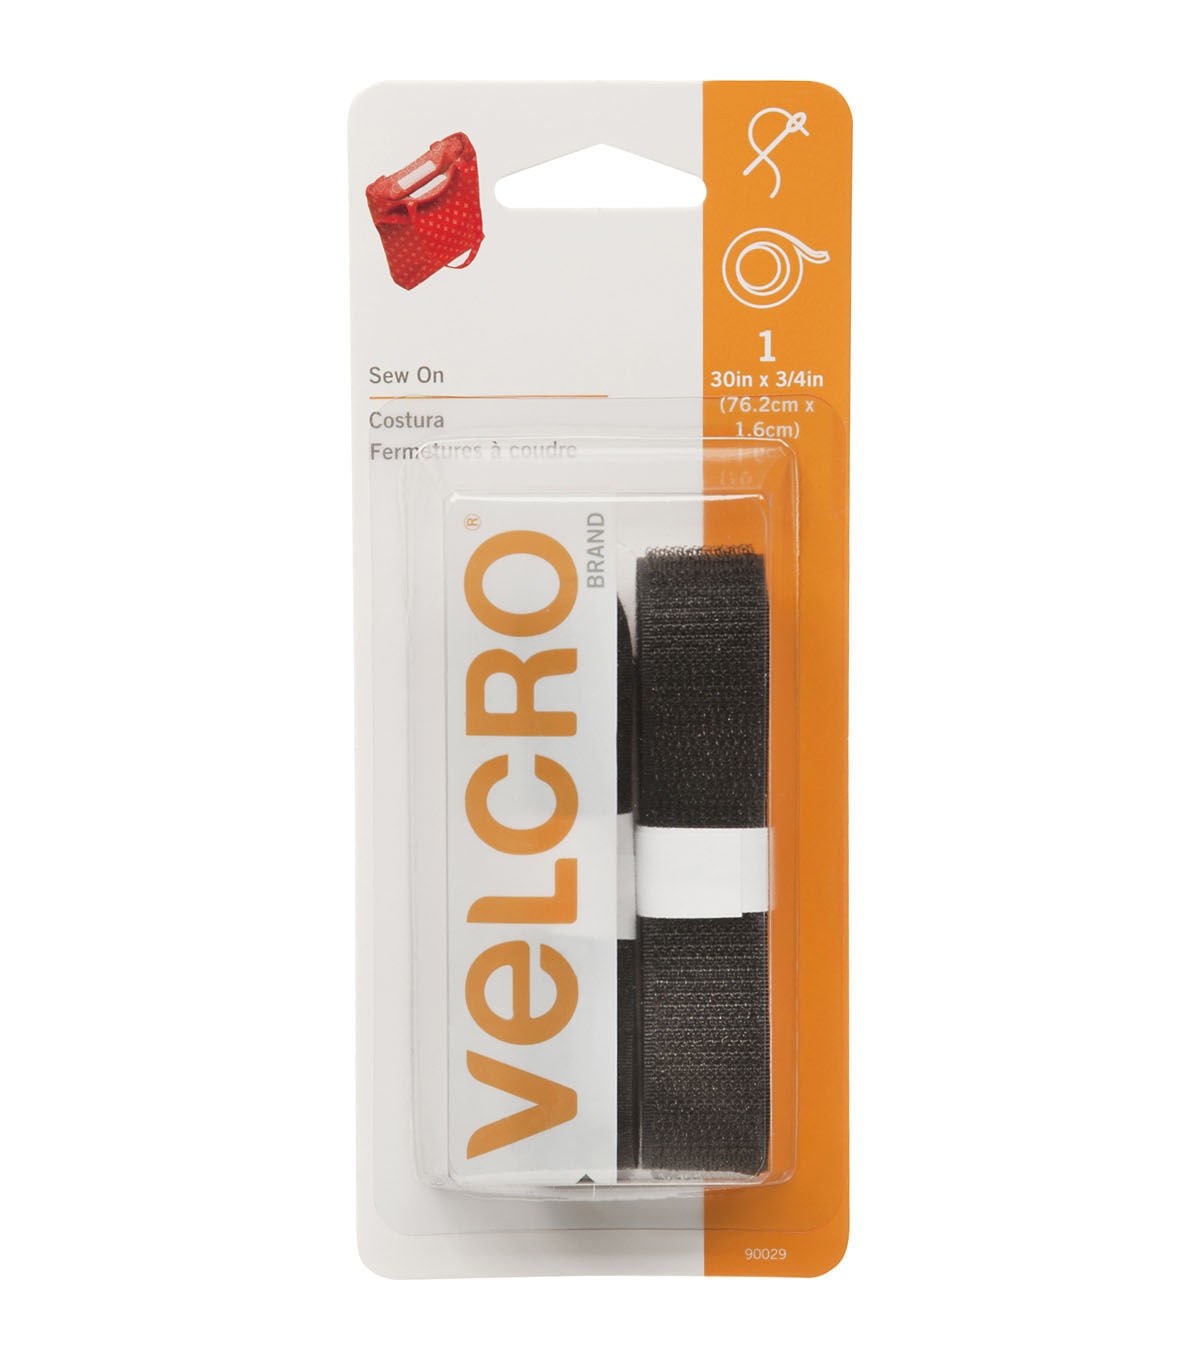 Stitch on tape VELCRO® Brand Sew on tape Hook and Loop Tape 2CMs wide 